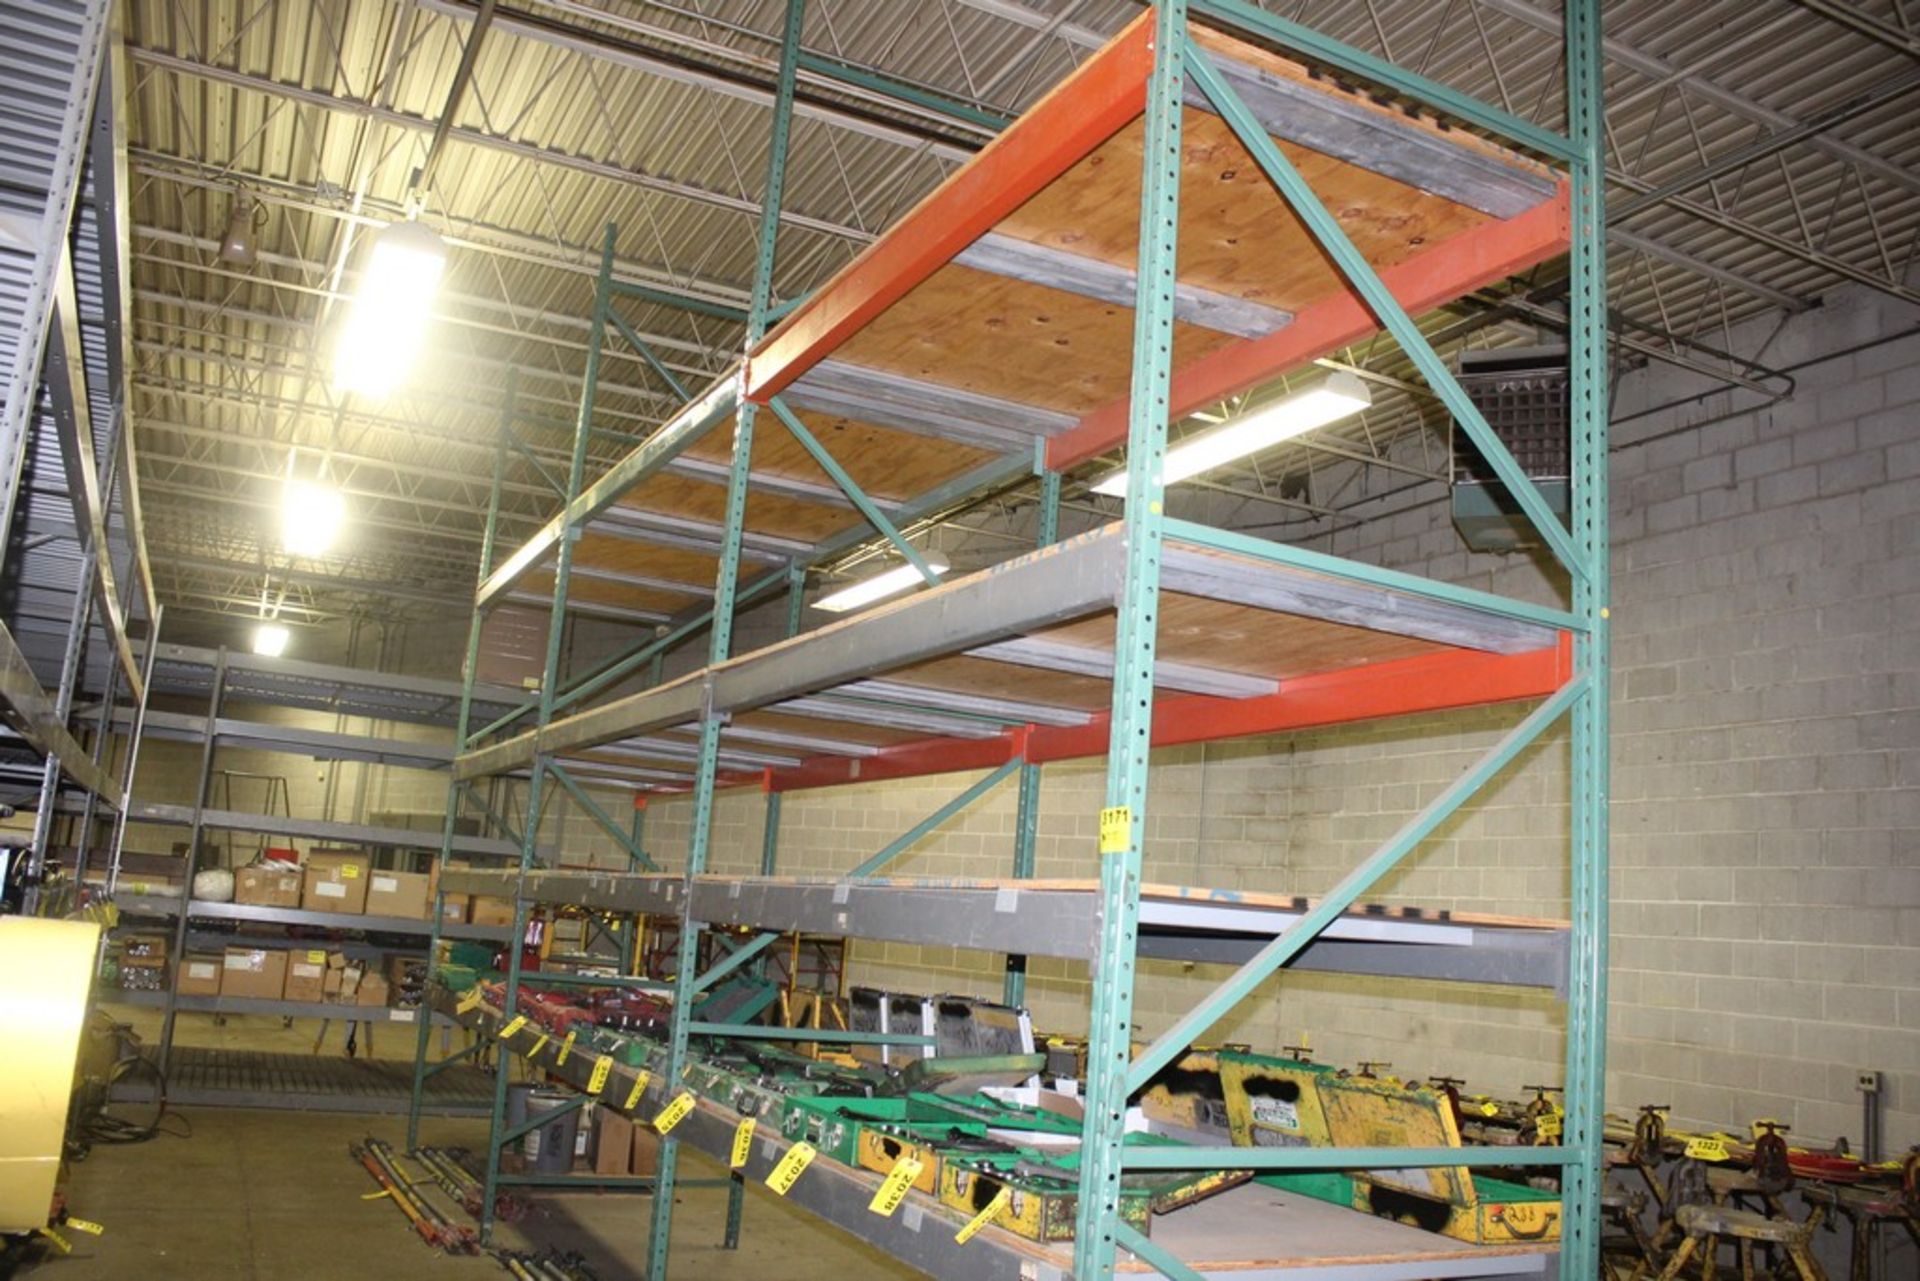 (3) SECTIONS 8' X 48" X 16' HEAVY DUTY ADJUSTABLE PALLET RACKING - DELAYED REMOVAL - WILL NOTIFY